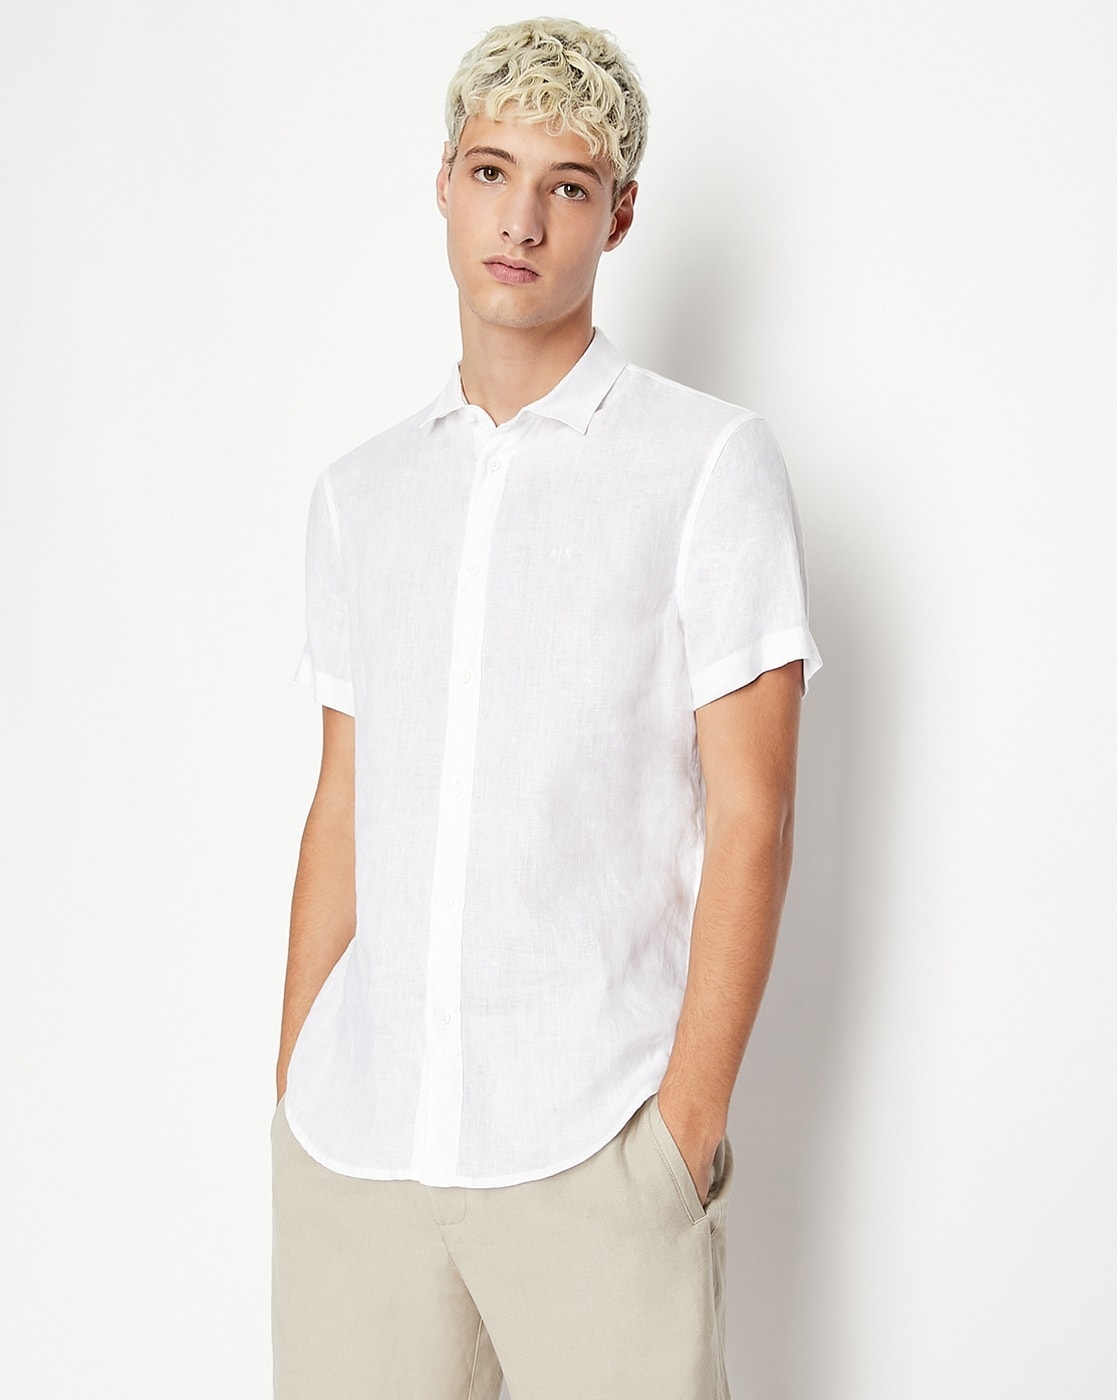 Armani Exchange Button Up Factory Store, Save 45% 